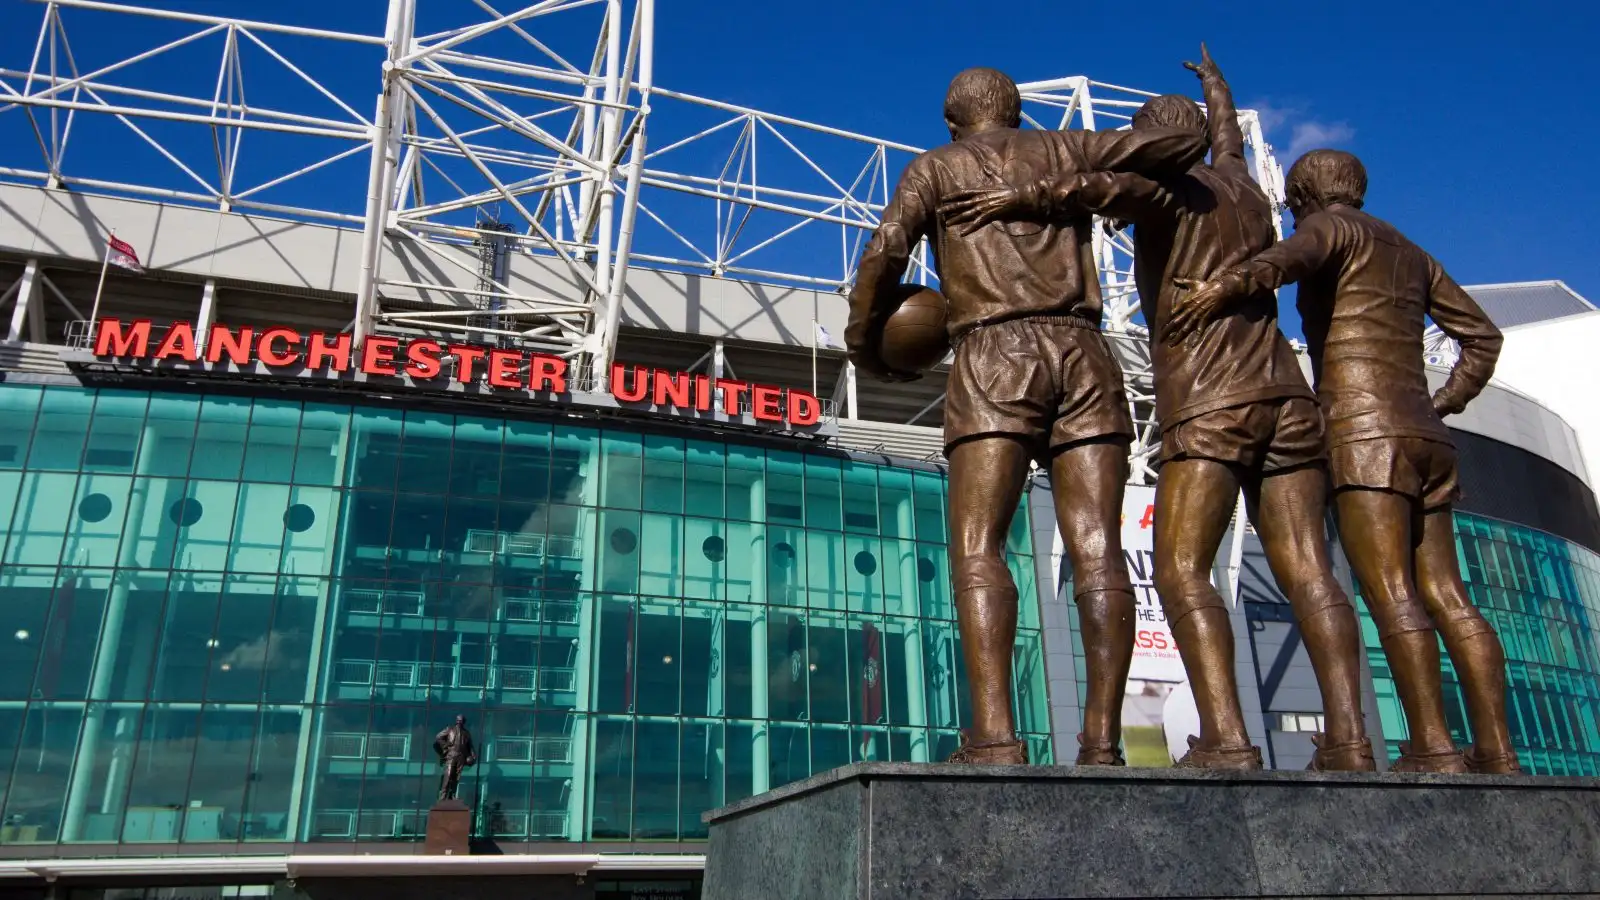 An outside view of Old Trafford.